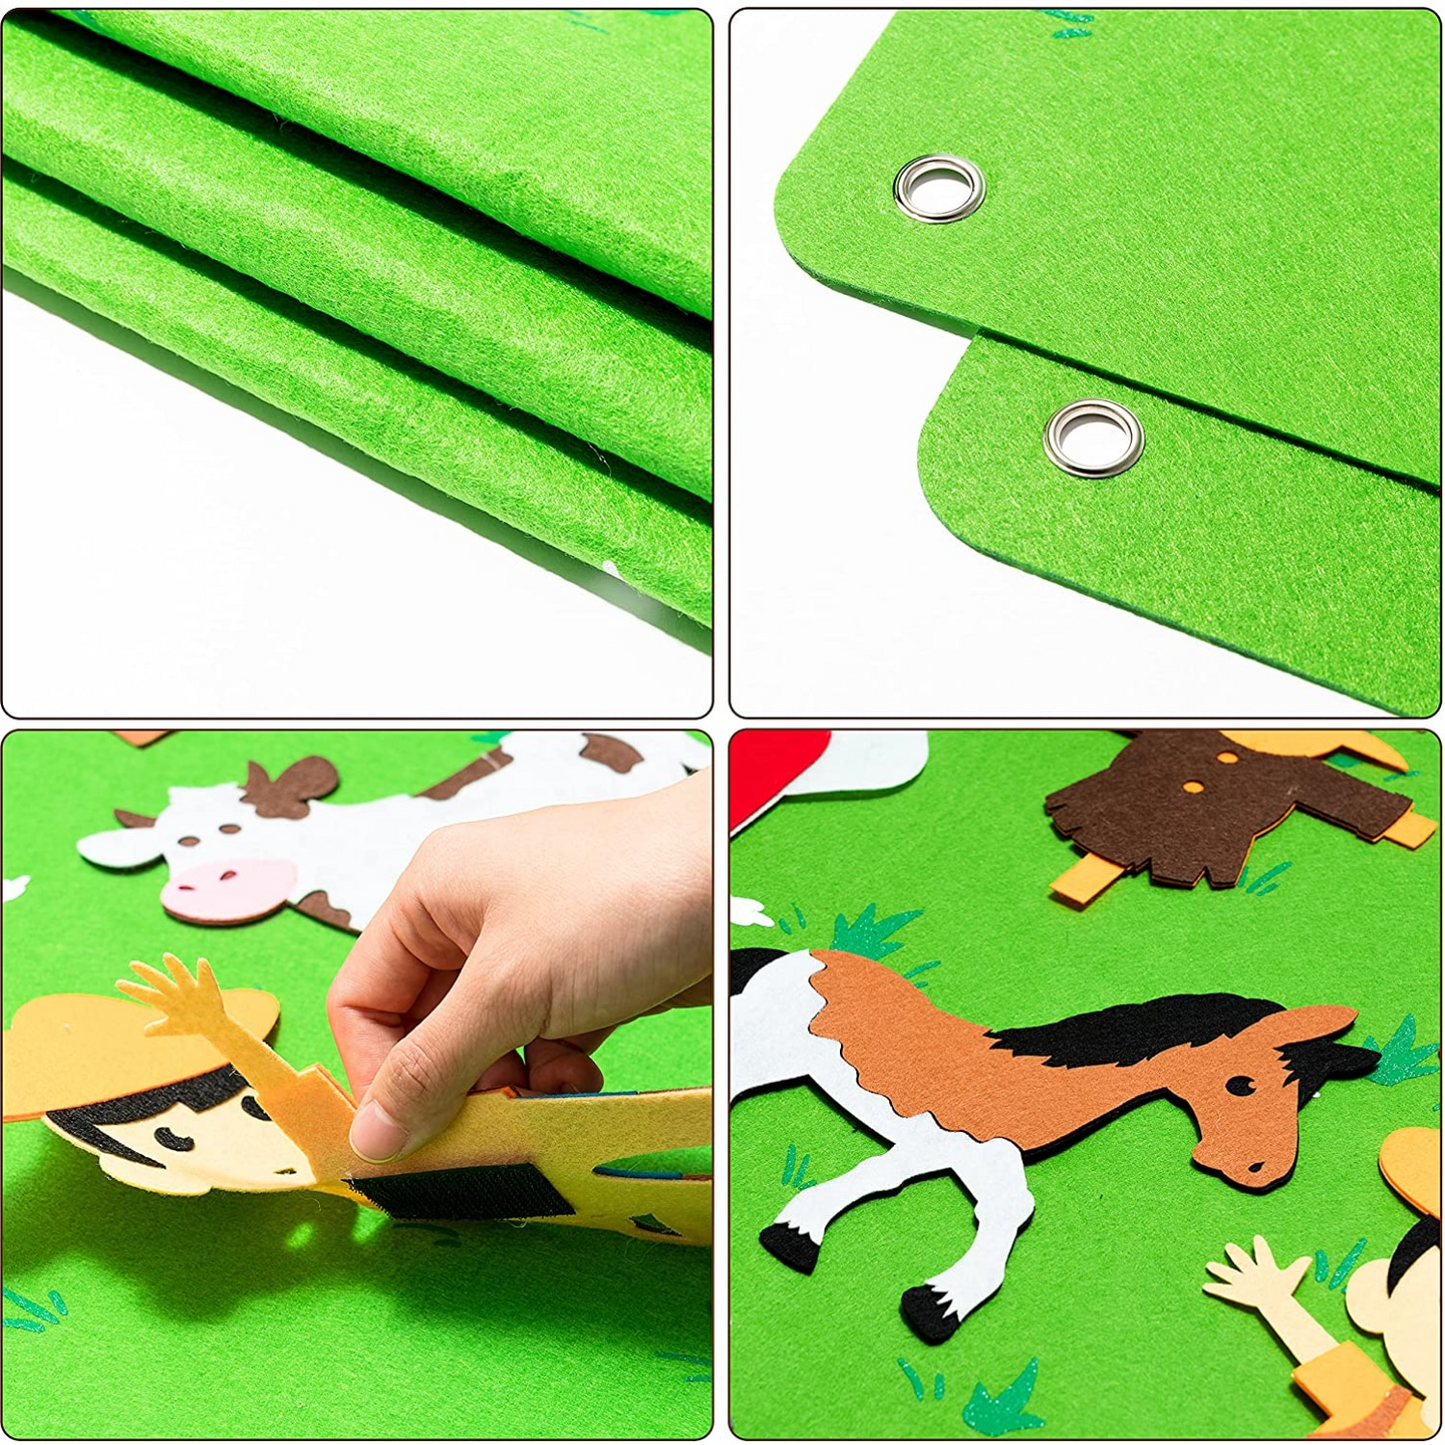 StoryCrafters: The Interactive Felt Storytelling Board